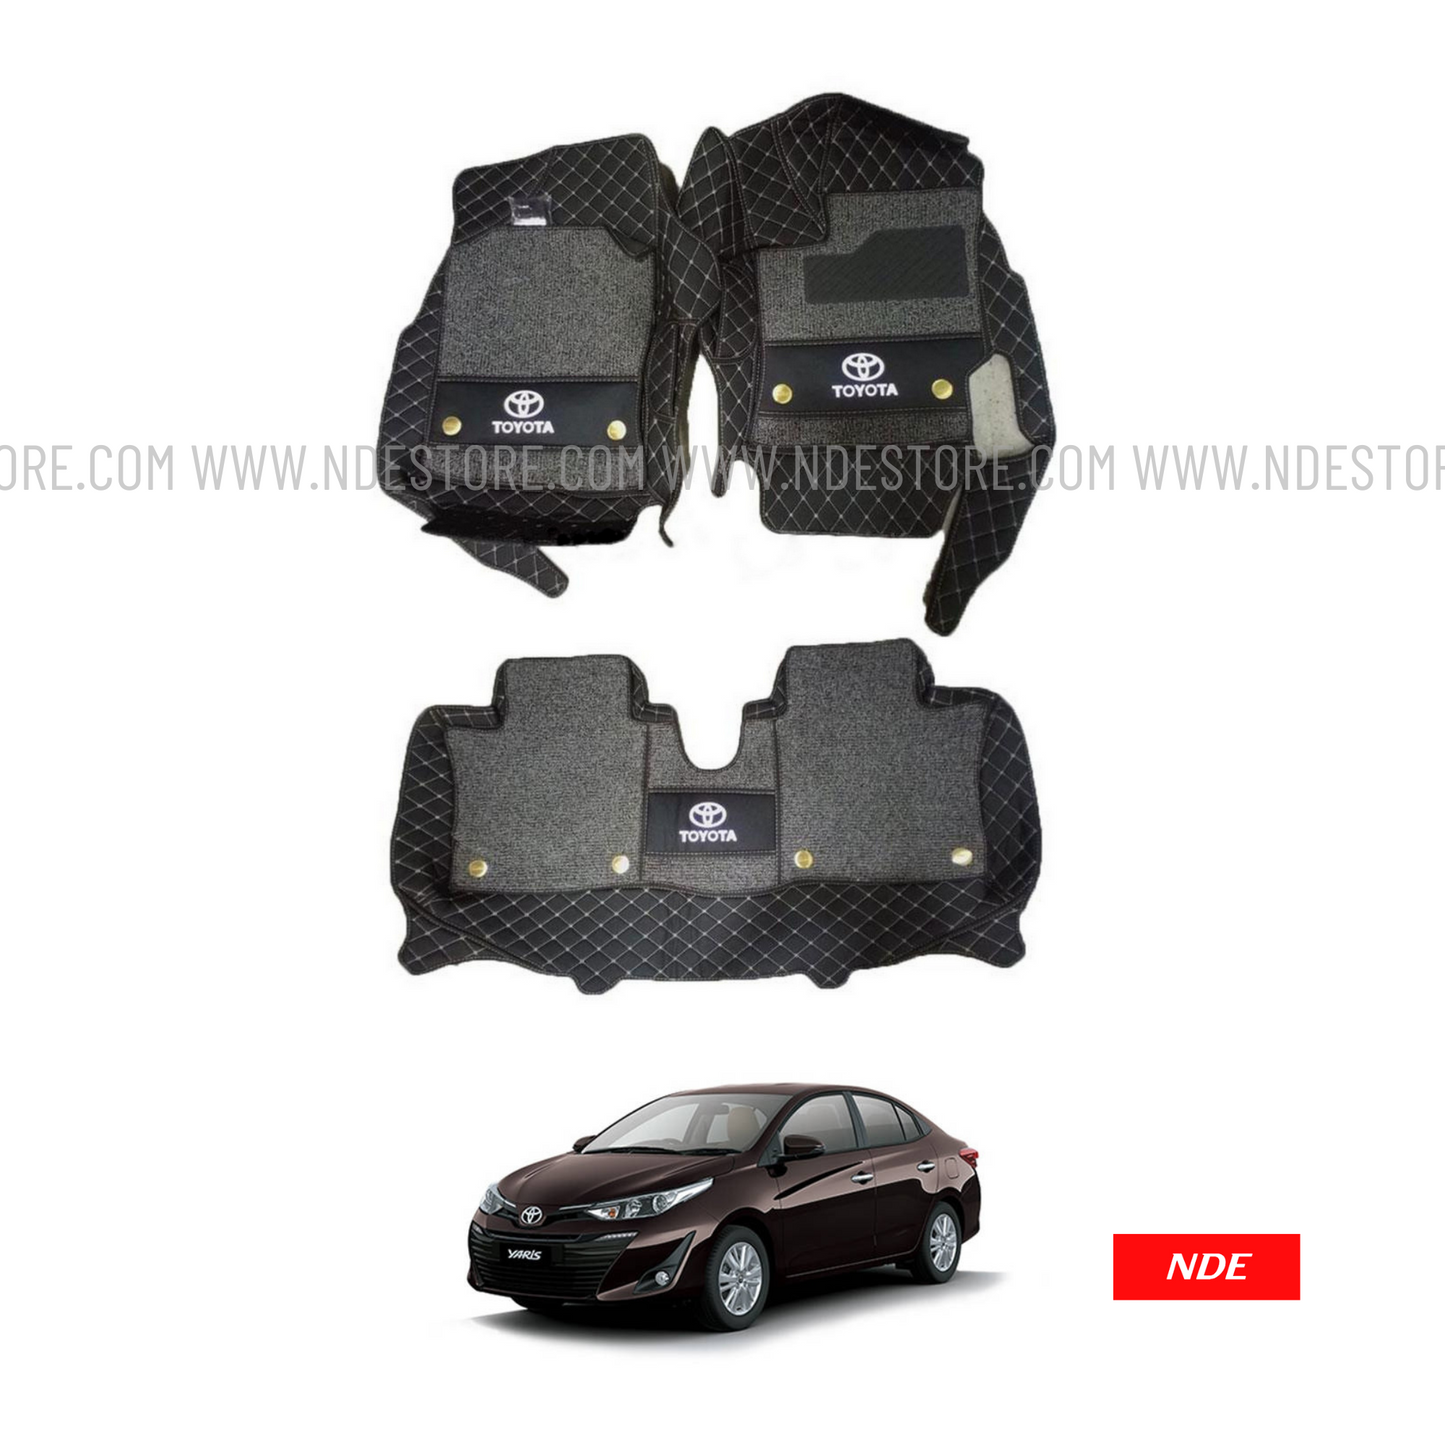 FLOOR MAT 10D BLACK WITH TOYOTA LOGO FOR TOYOTA YARIS